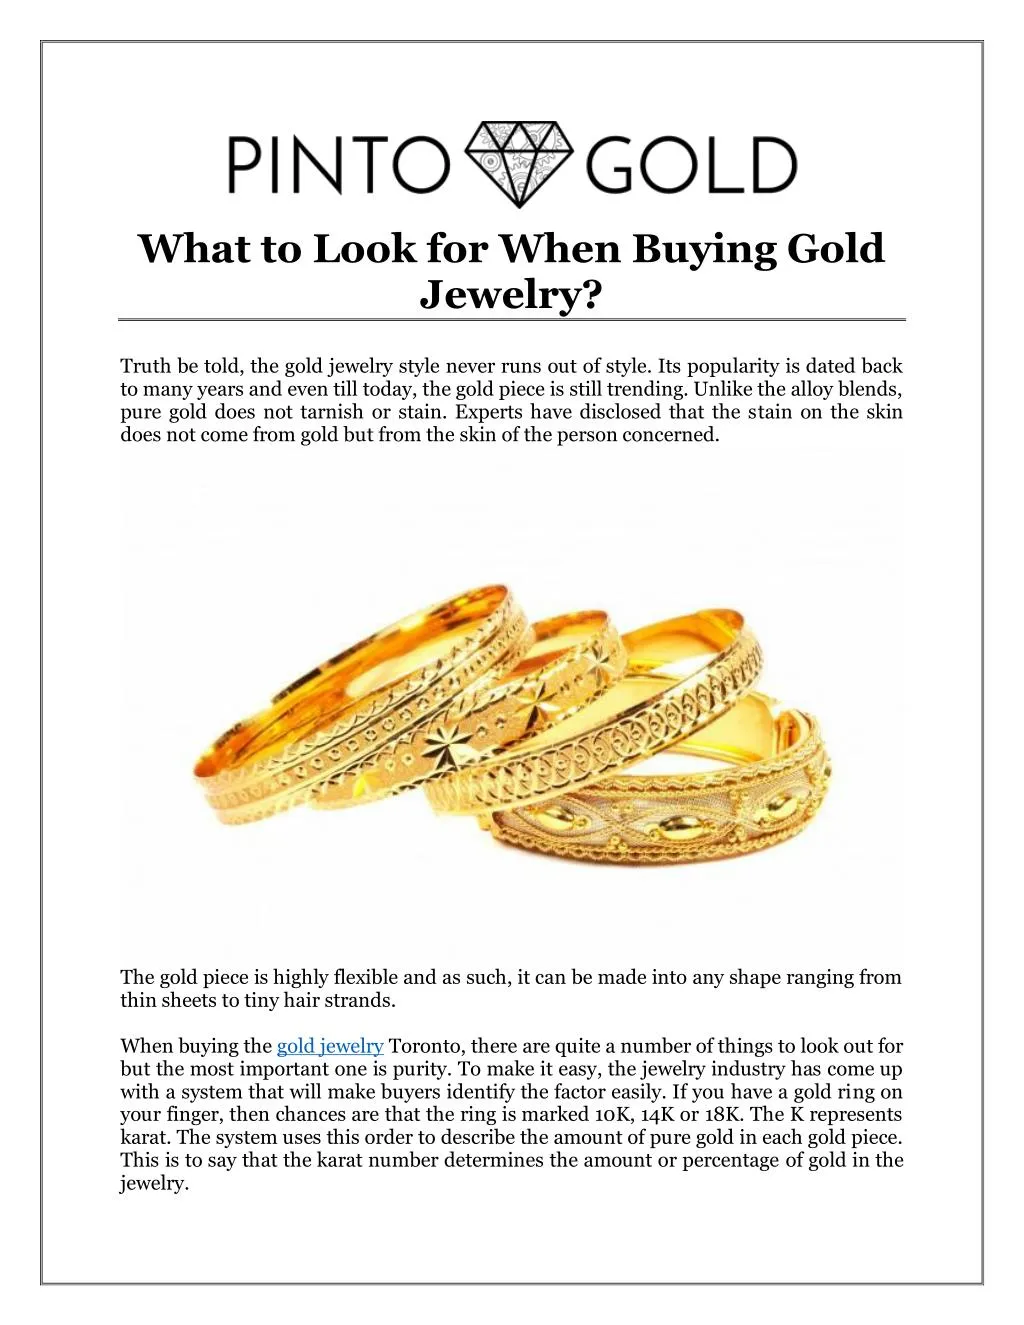 what to look for when buying gold jewelry